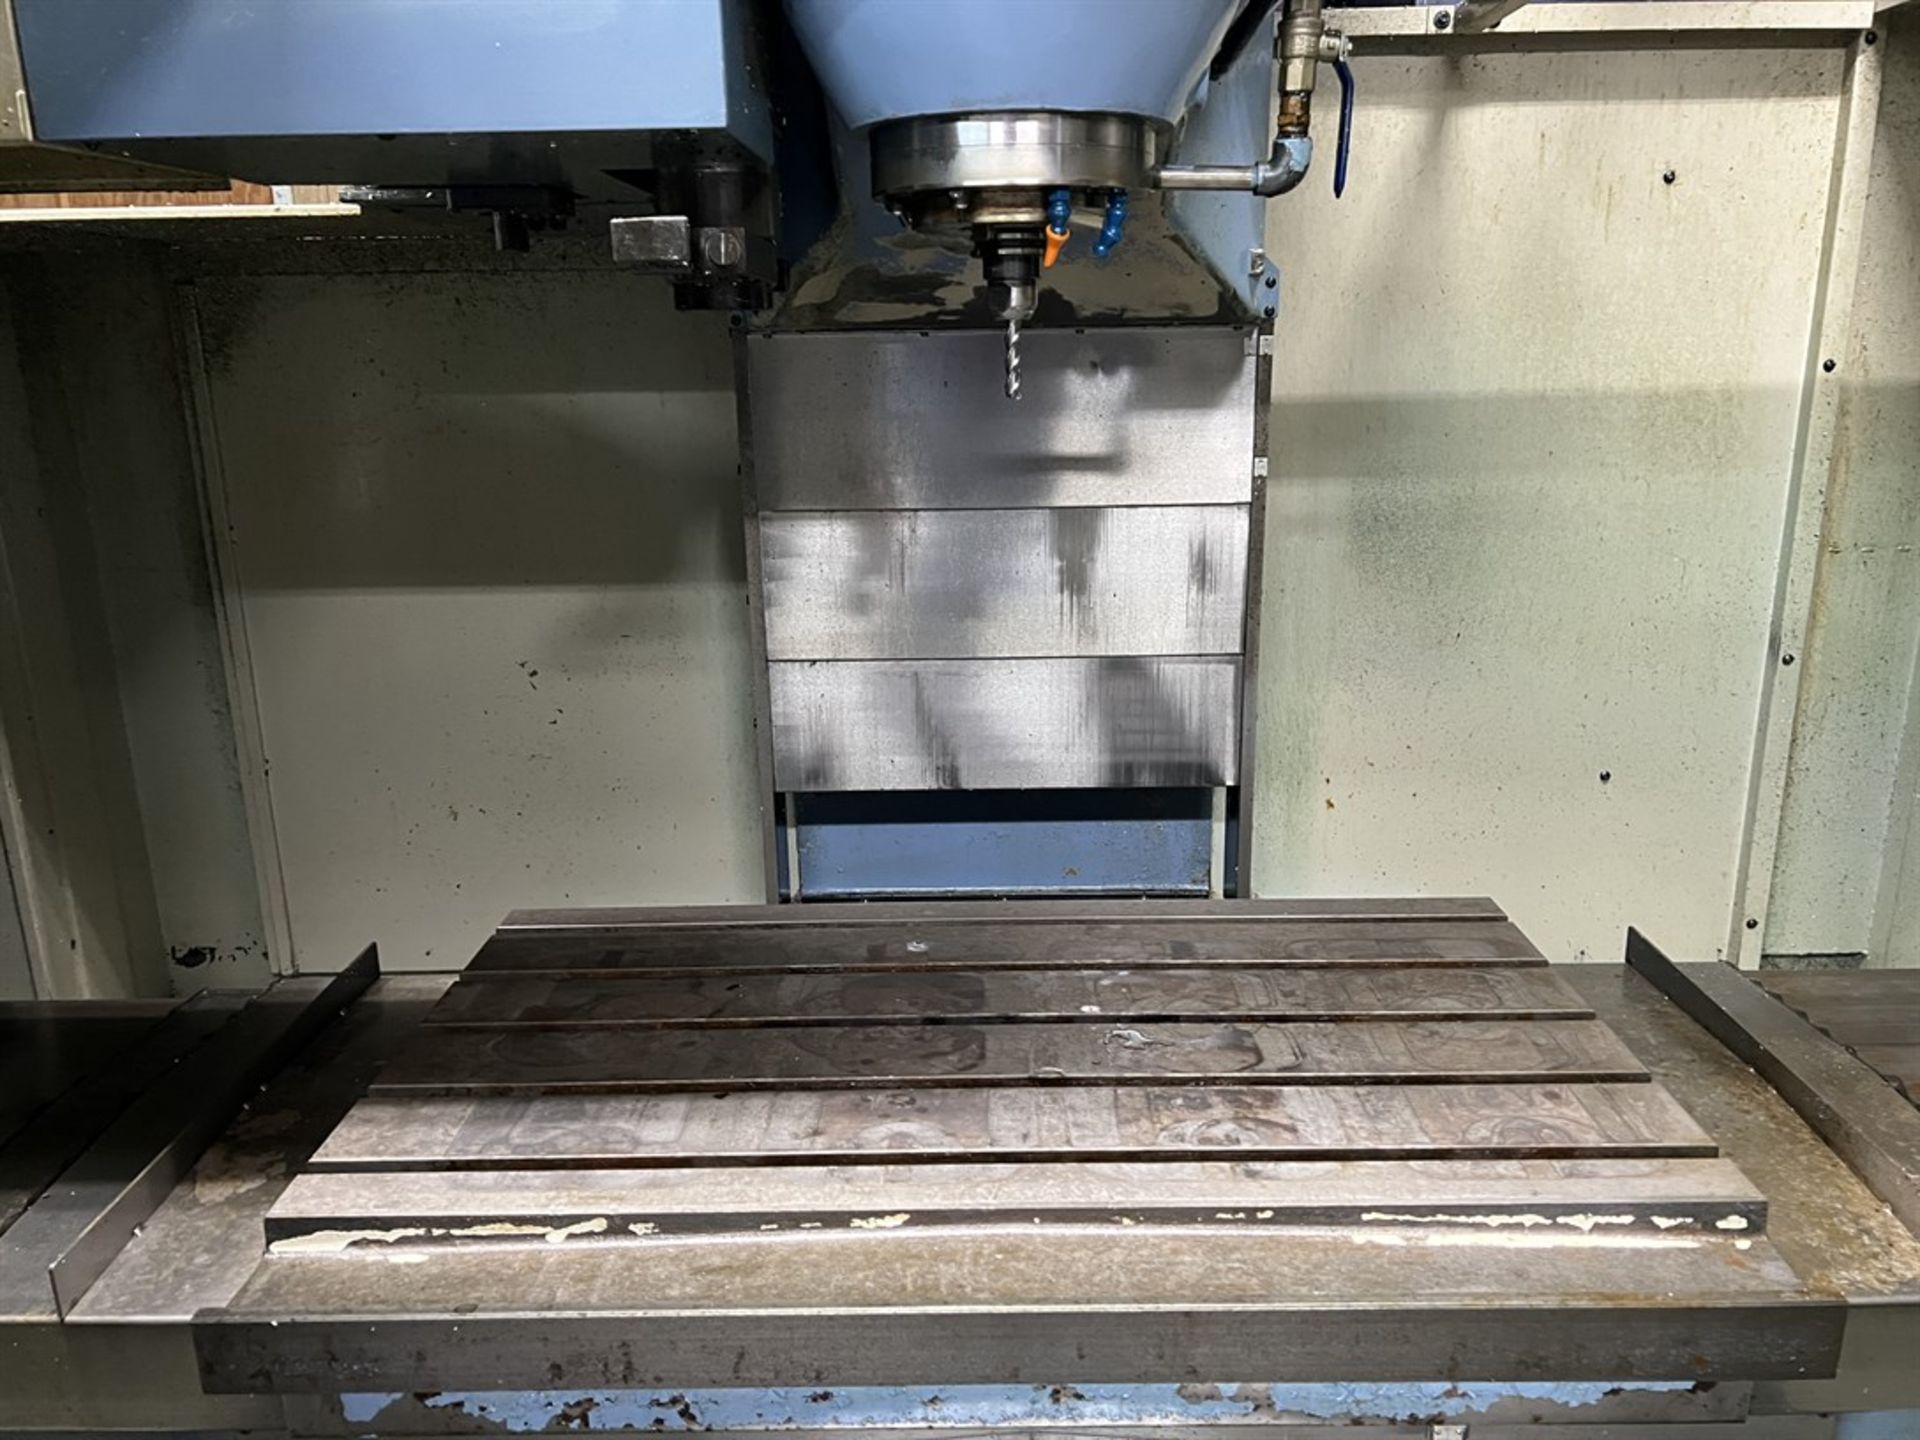 OKK VM5II Vertical Machining Center, s/n, 451, Neomatic 635 Control, 22” x 41” Table, CT40 Spindle - Image 2 of 10